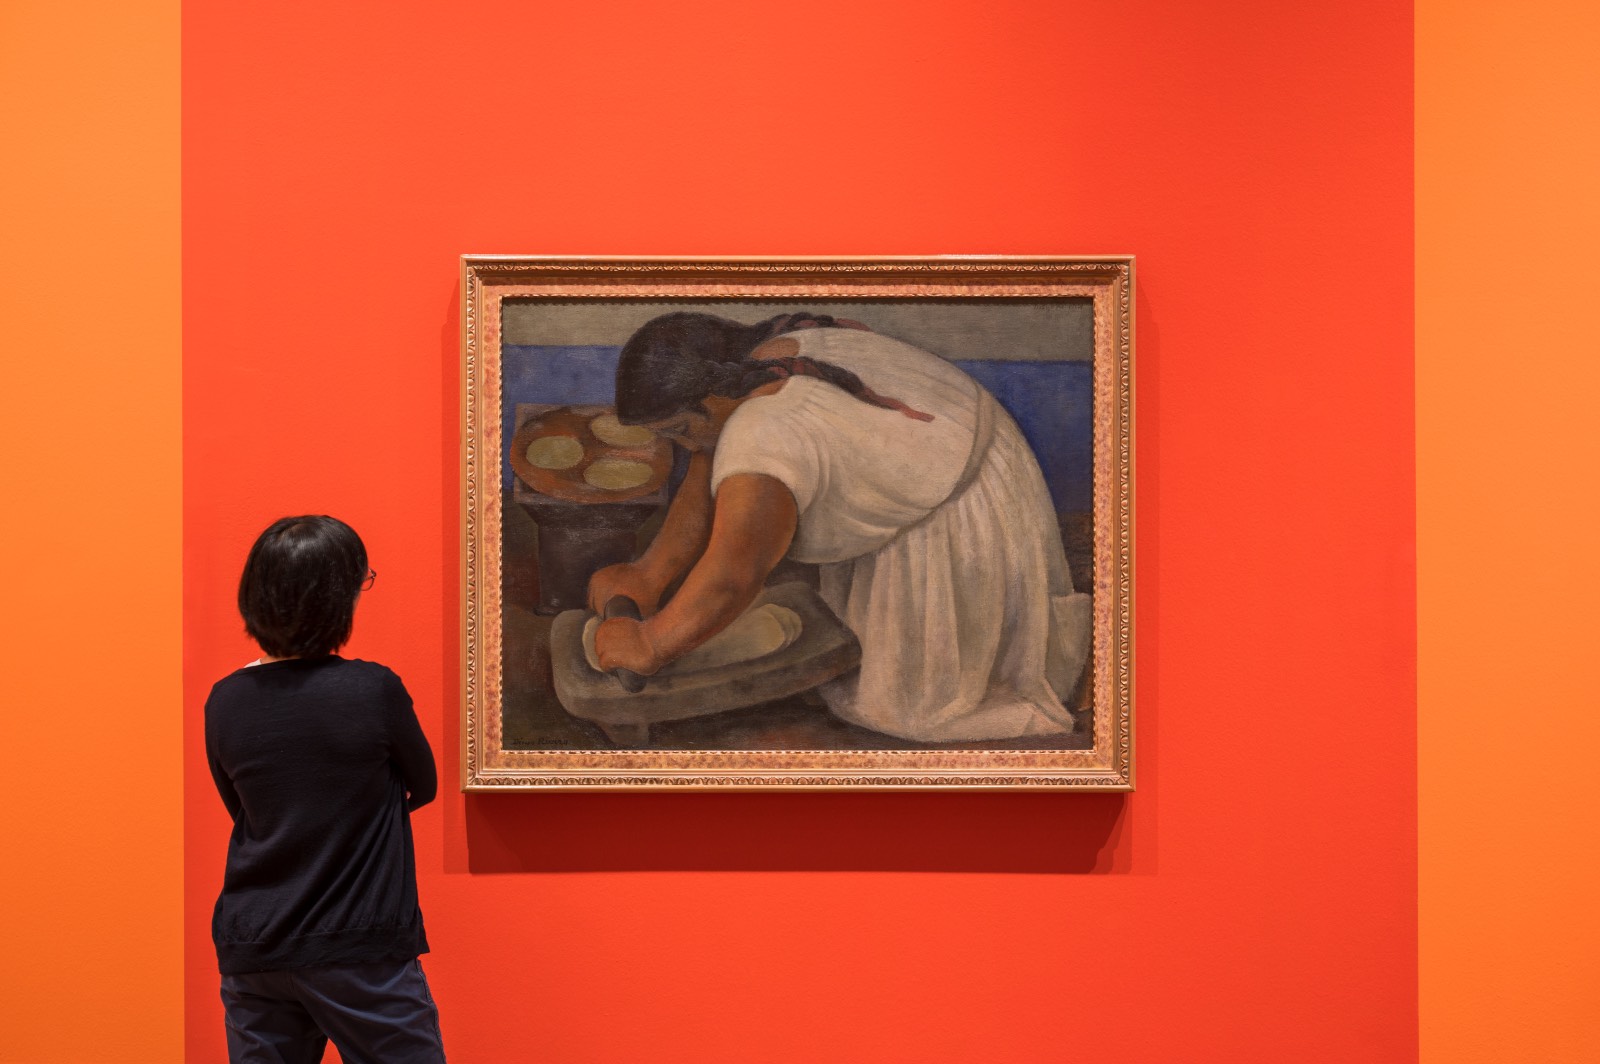 , ‘Tropical’ exhibition of Southeast Asian and Latin American art reveals similarities many of us never knew existed